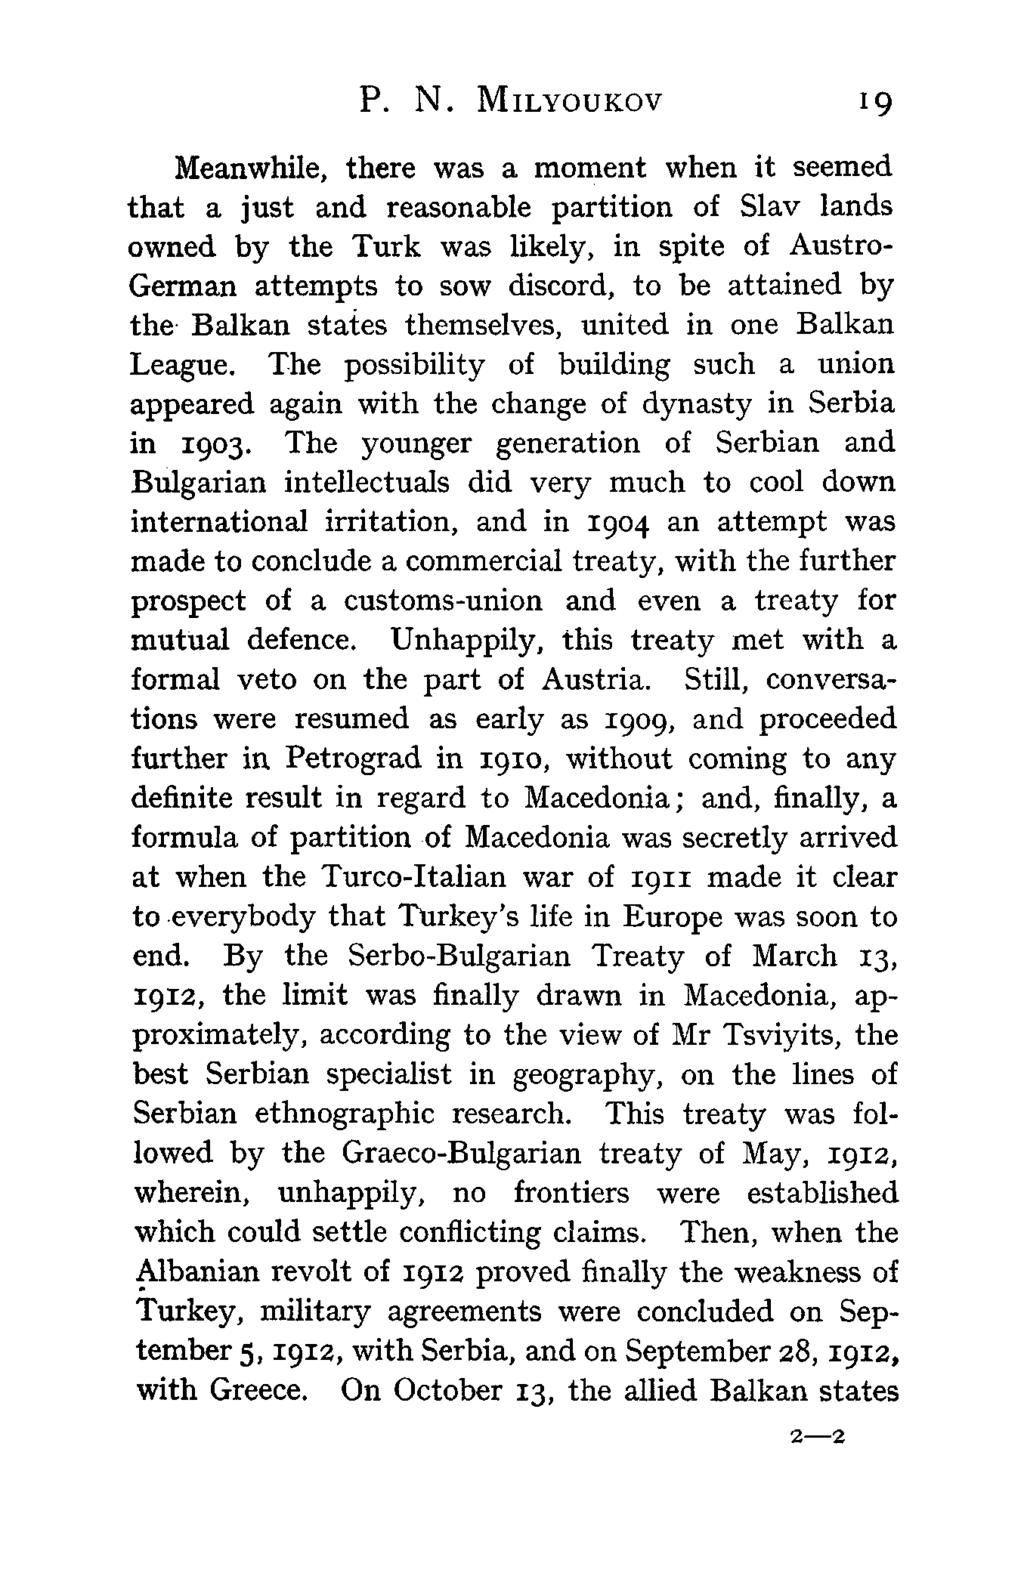 P. N. MILYOUKOV 19 Meanwhile, there was a moment when it seemed that a just and reasonable partition of Slav lands owned by the Turk was likely, in spite of Austro- German attempts to sow discord, to